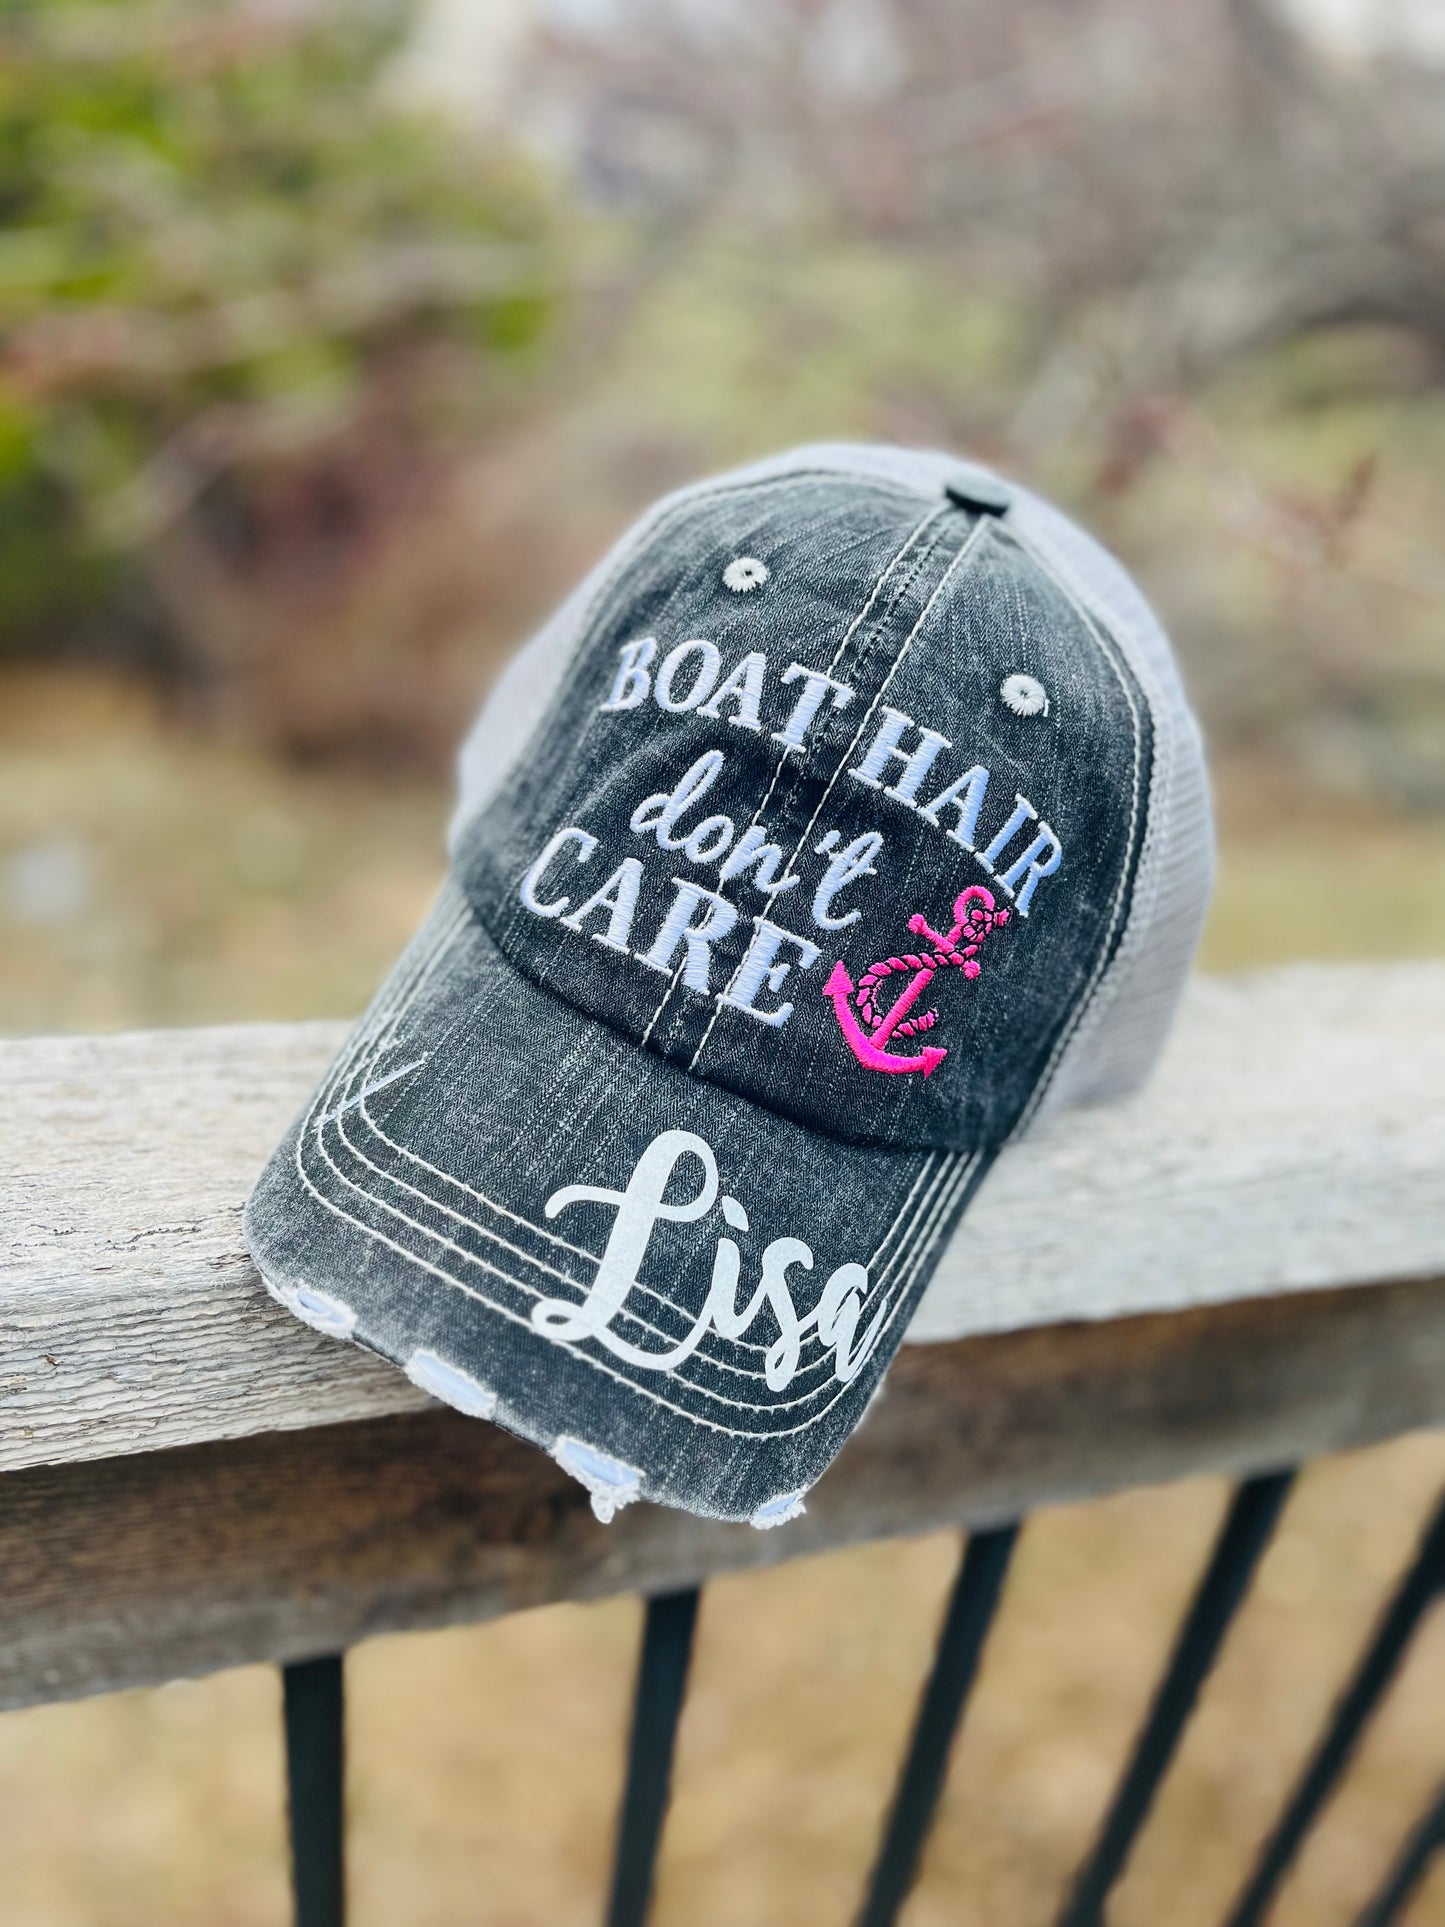 Boating Hats Boat hair dont care Teal or pink anchor Personalized e mbroidered gray distressed trucker caps mesh back adjustable velkro - Stacy's Pink Martini Boutique